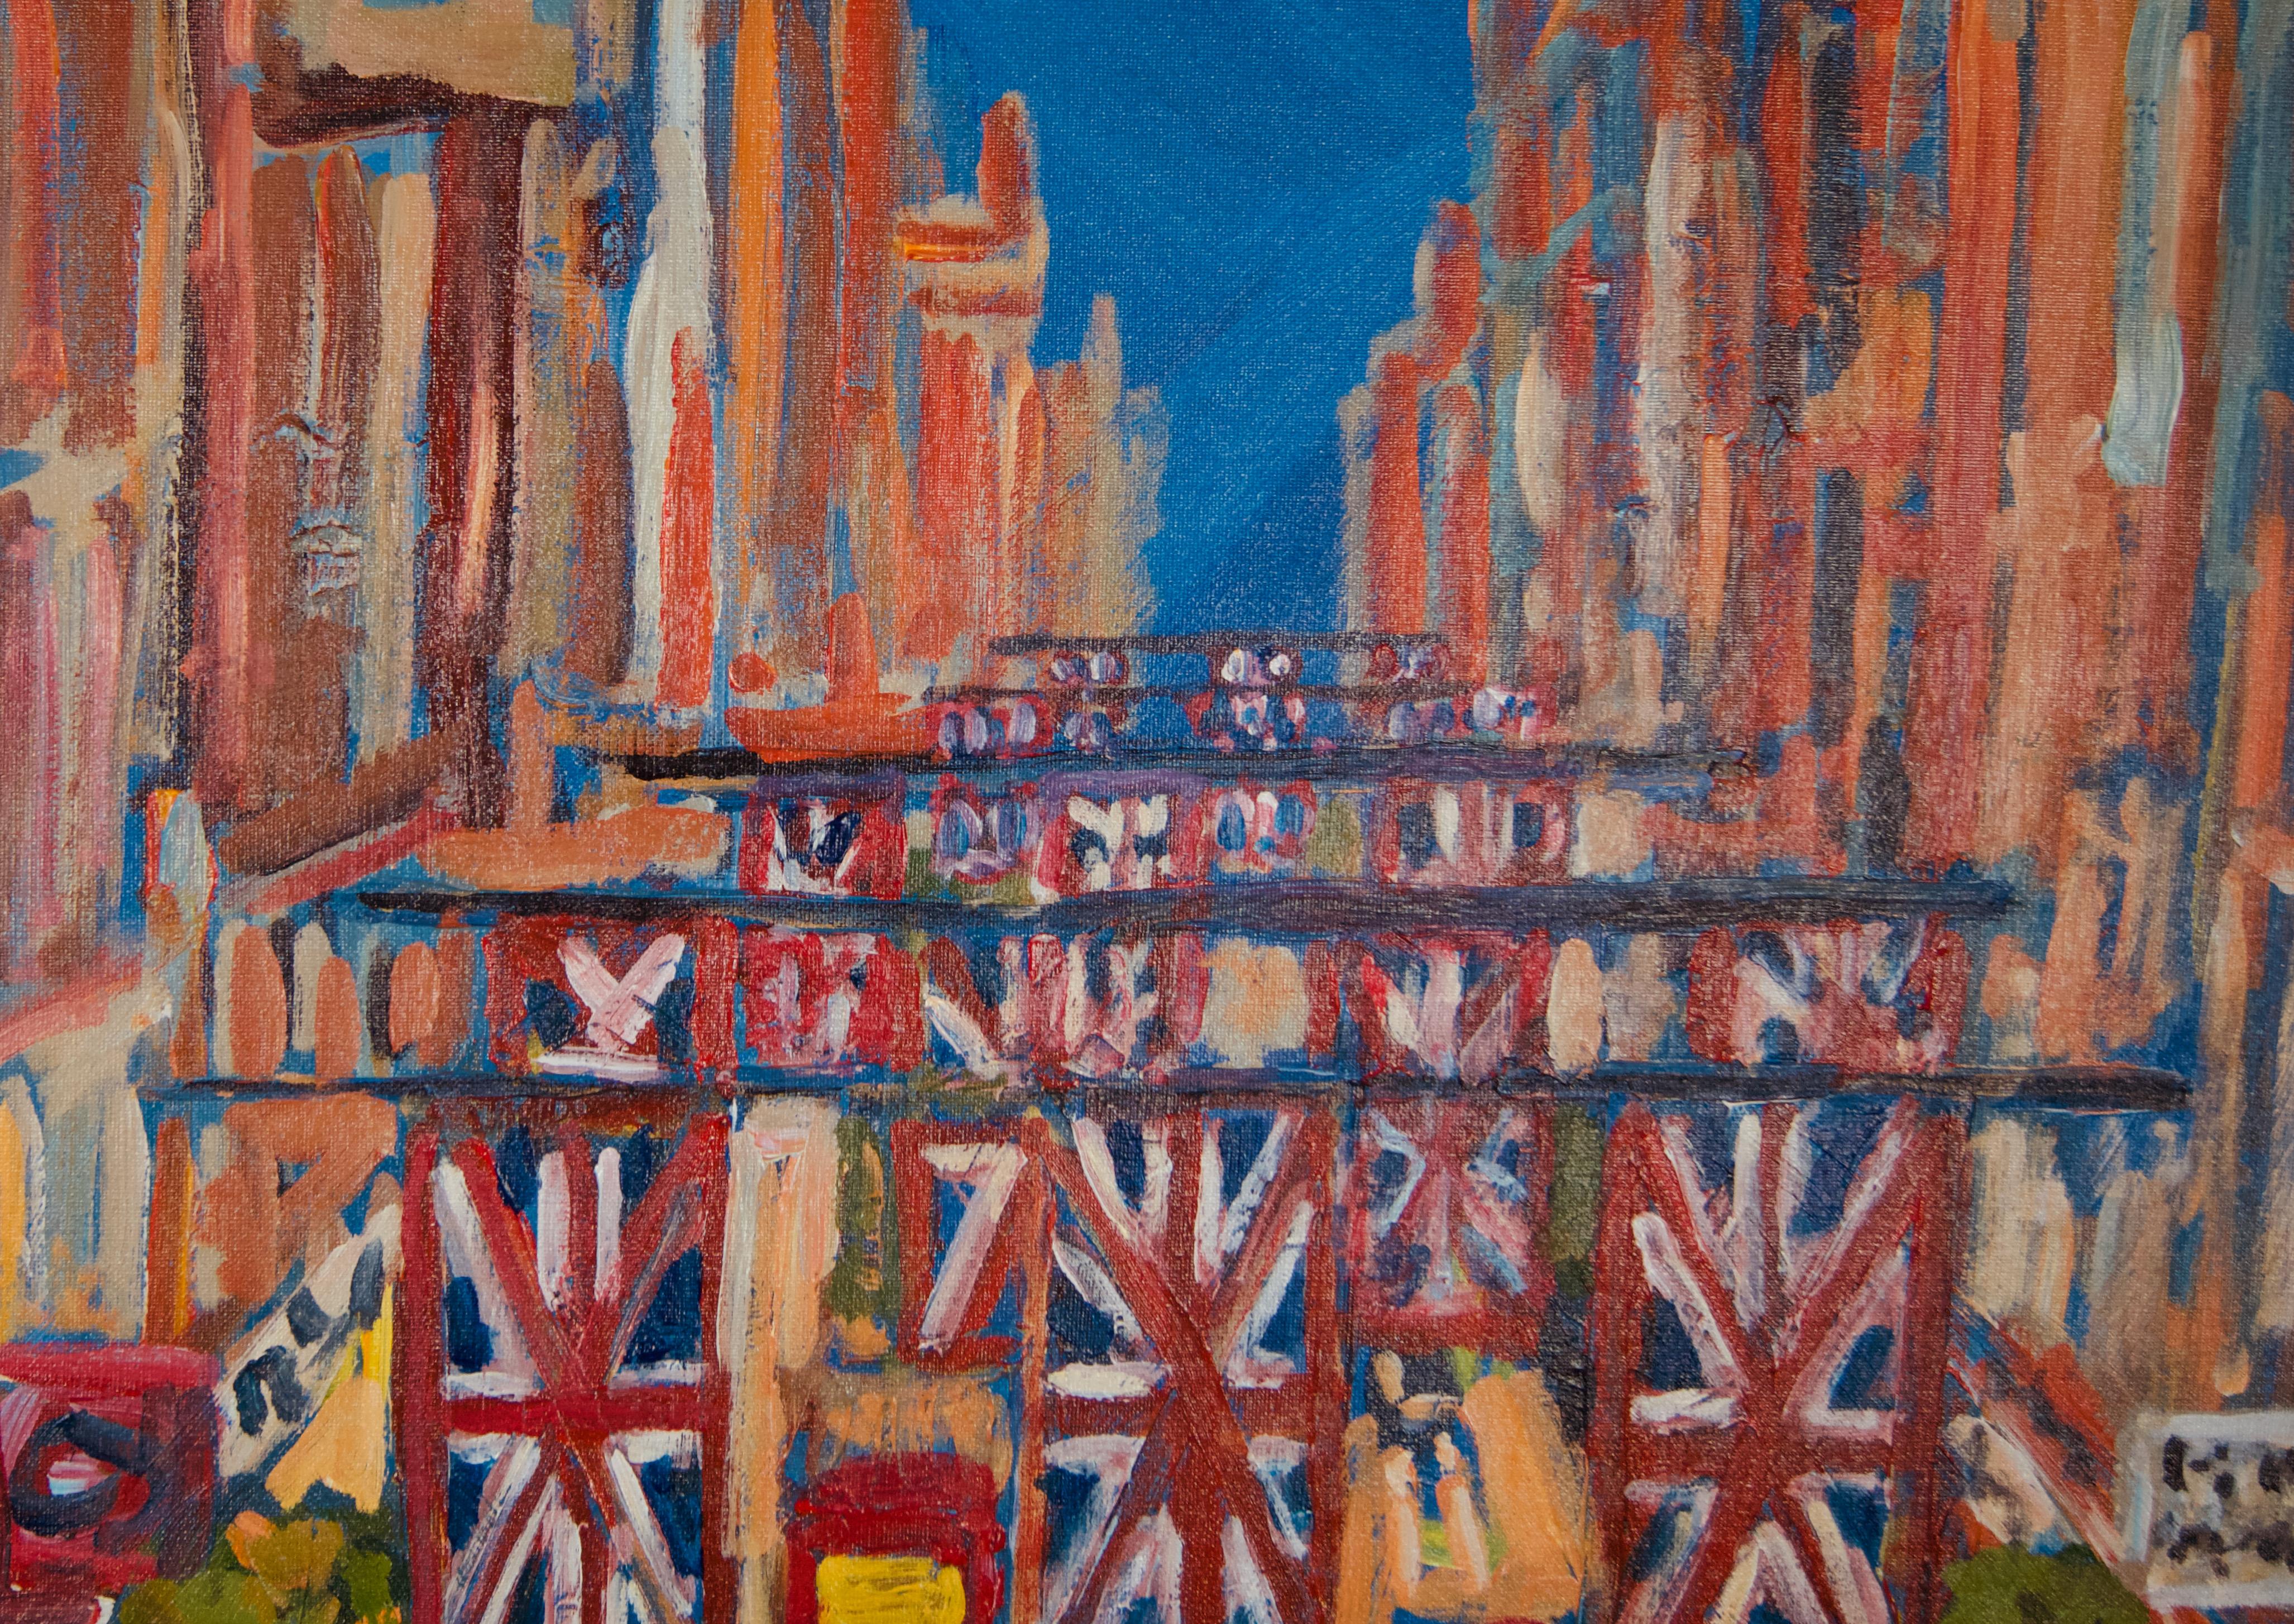 Oxford Street London - Late 20th Century Impressionist Acrylic by Michael Quirke 2